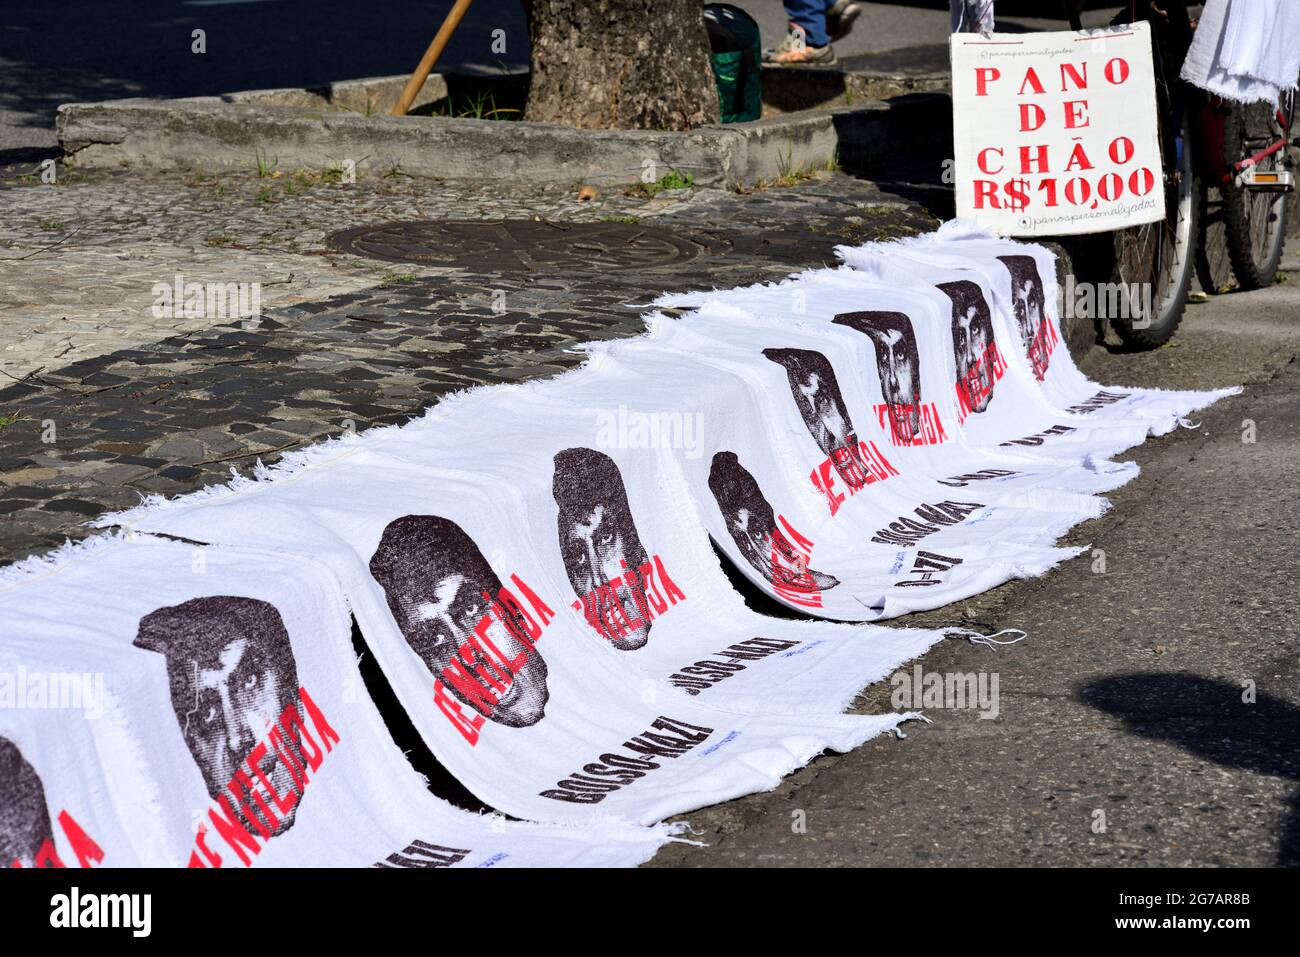 Brazil - July 3, 2021: Street vendors sell floorcloths with the image of Brazil's President Jair Bolsonaro during a protest held in Rio de Janeiro. Stock Photo